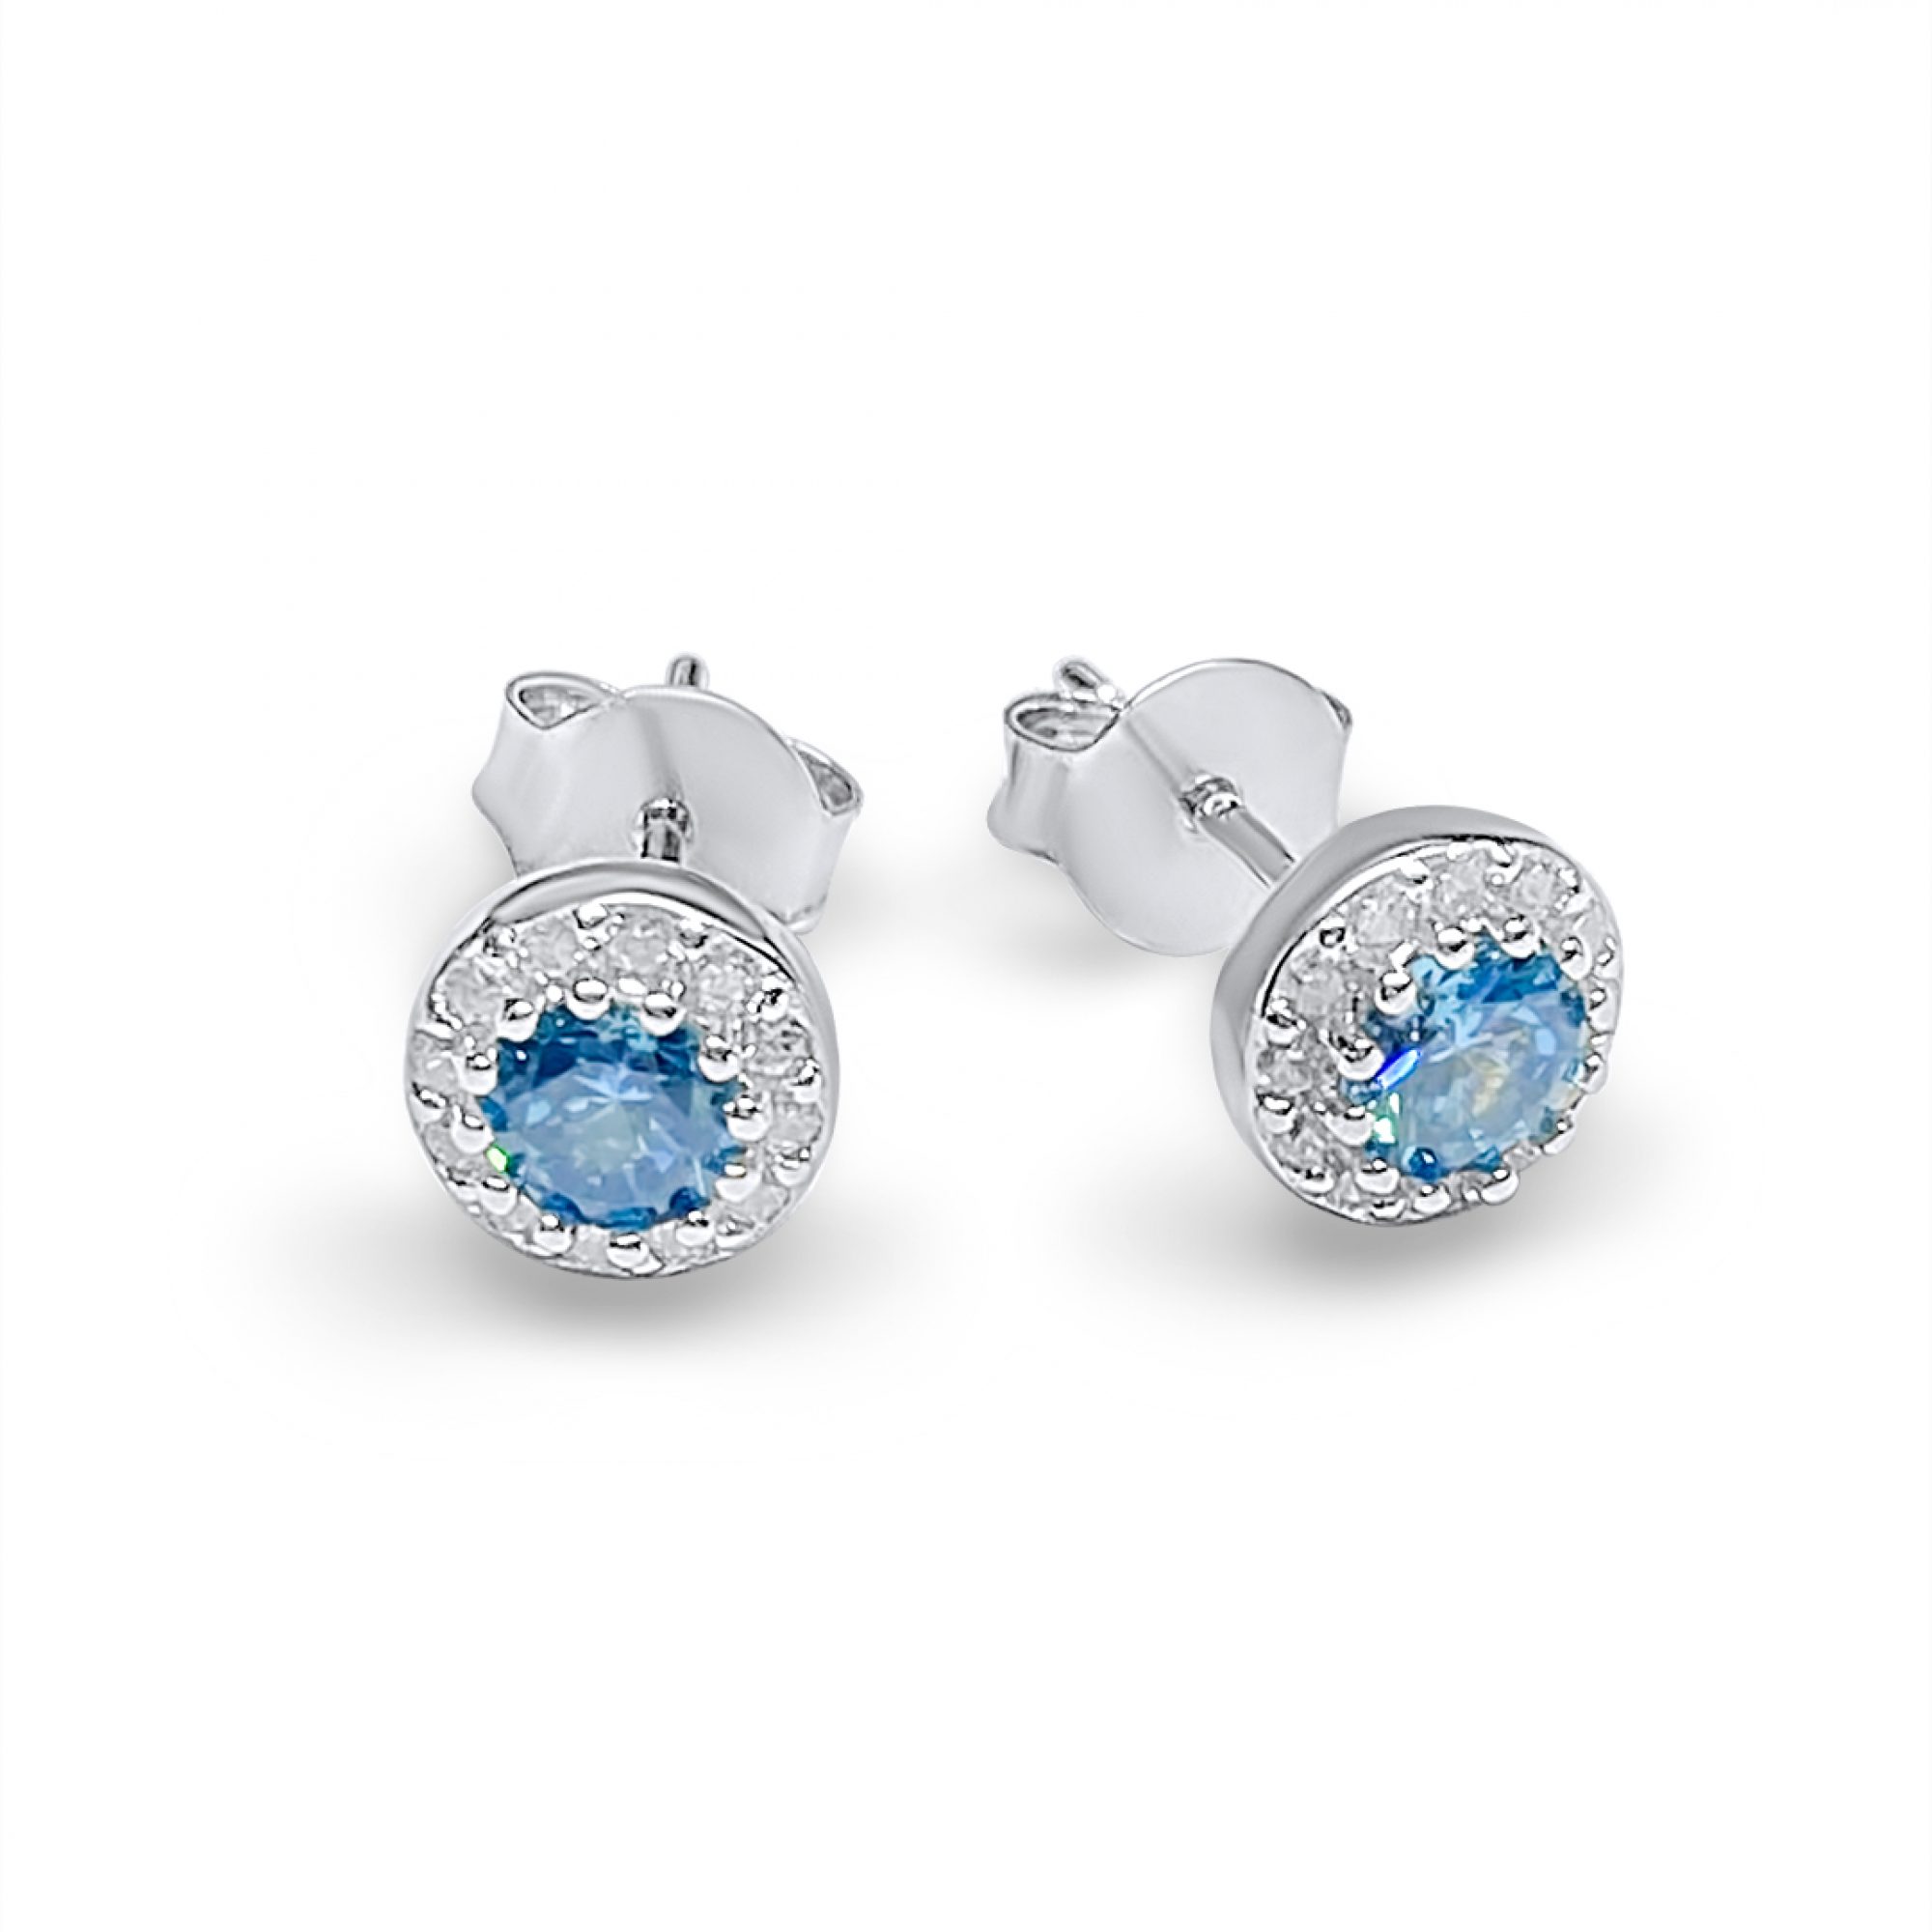 Silver stud earrings with aquamarine and zircon stones